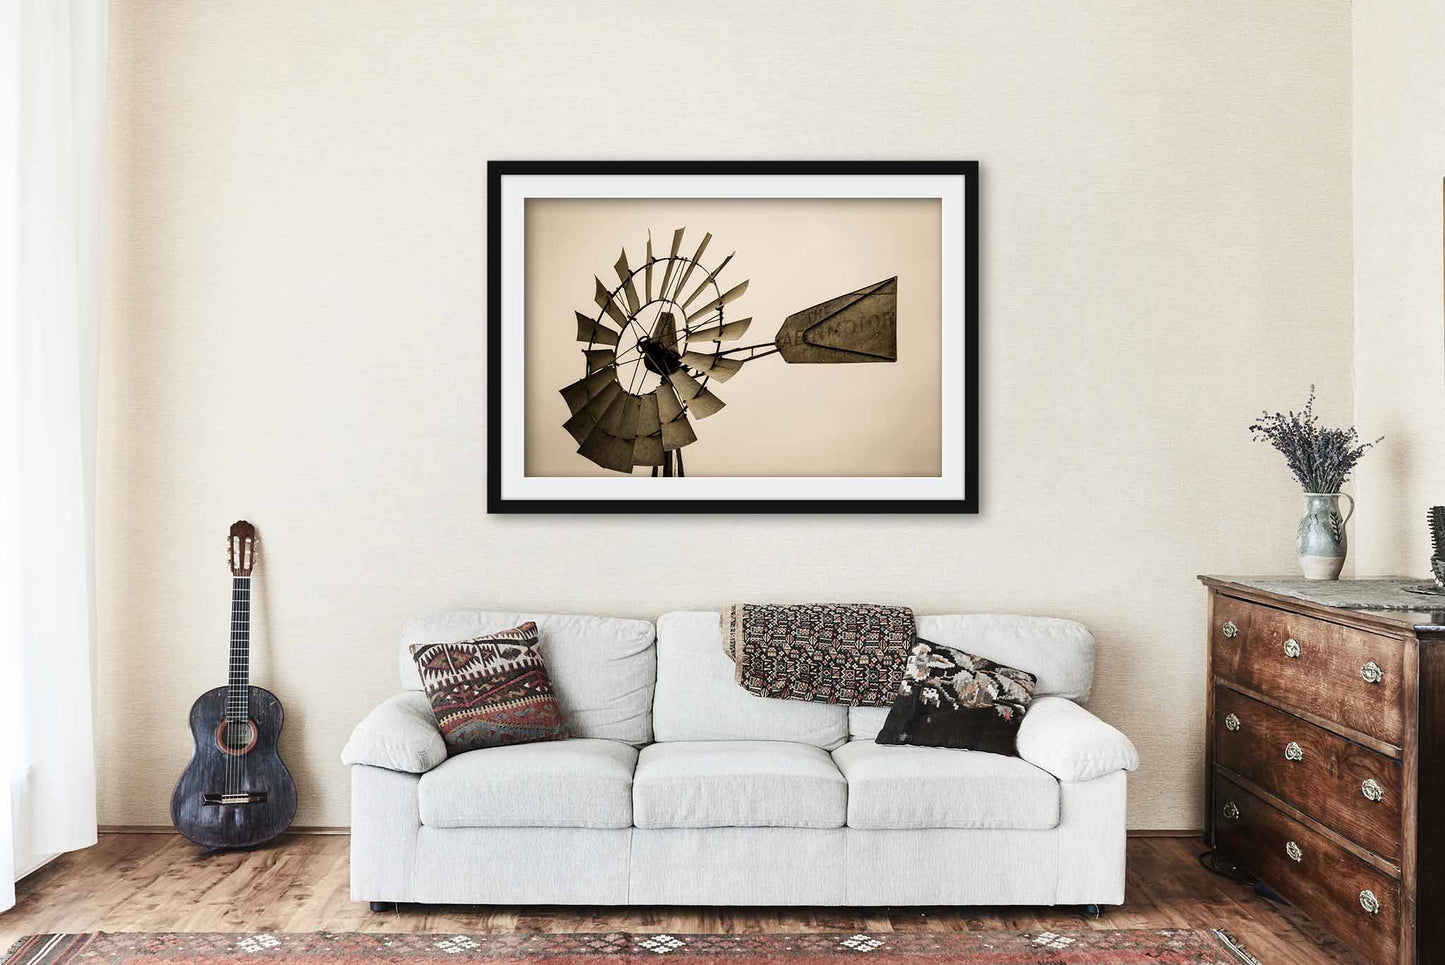 Windmill Framed and Matted Print | Country Photo | Iowa Decor | Sepia Photography | Farmhouse Wall Art | Ready to Hang